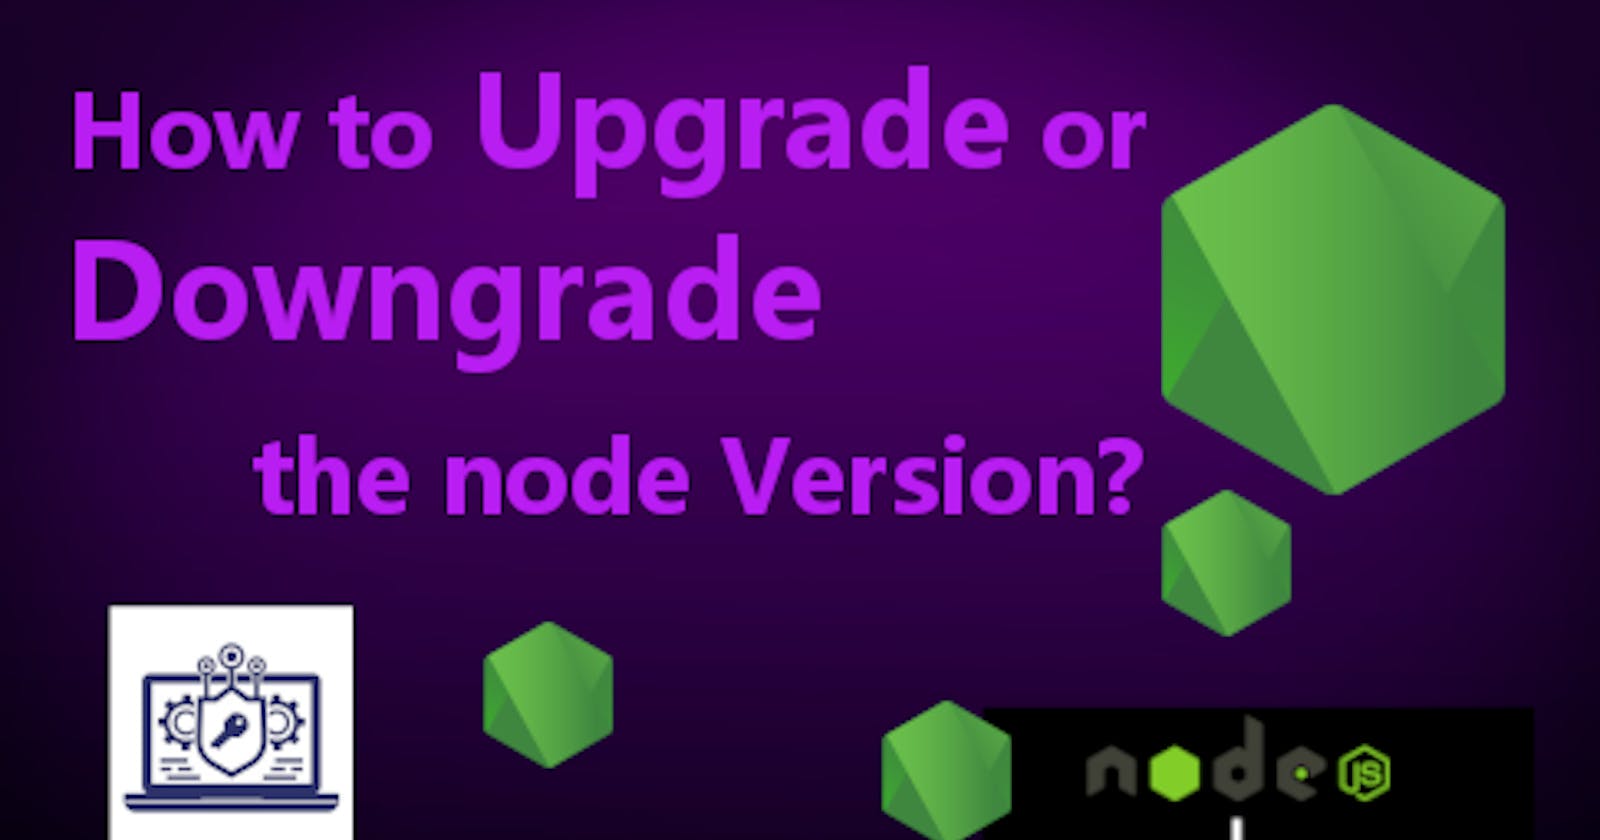 How To Upgrade or Downgrade the Node Version?